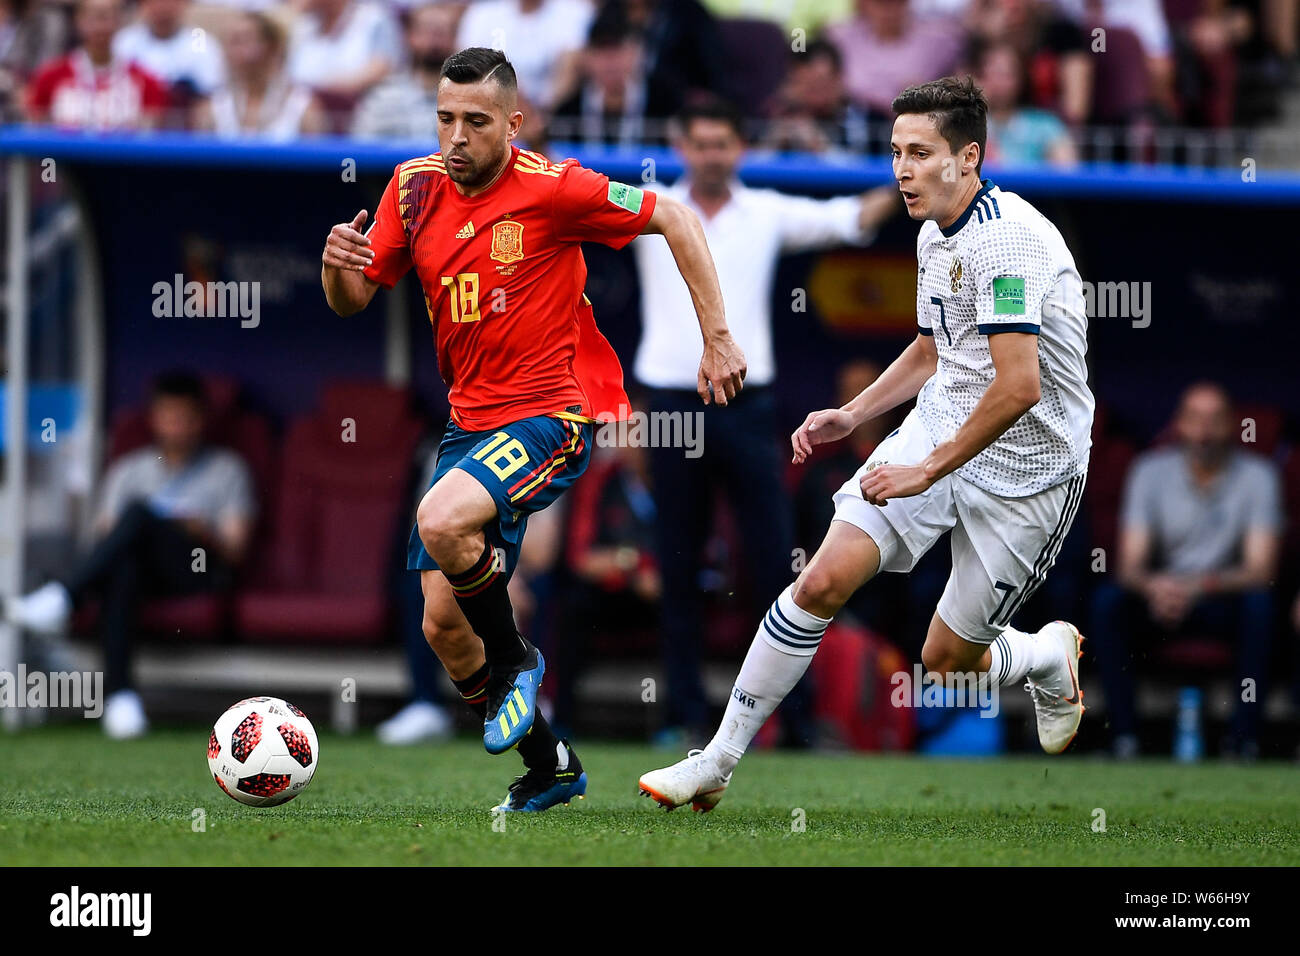 Daler Kuzyayev of Russia, right, challenges Jordi Alba of Spain in their Round of 16 match during the 2018 FIFA World Cup in Moscow, Russia, 1 July 20 Stock Photo